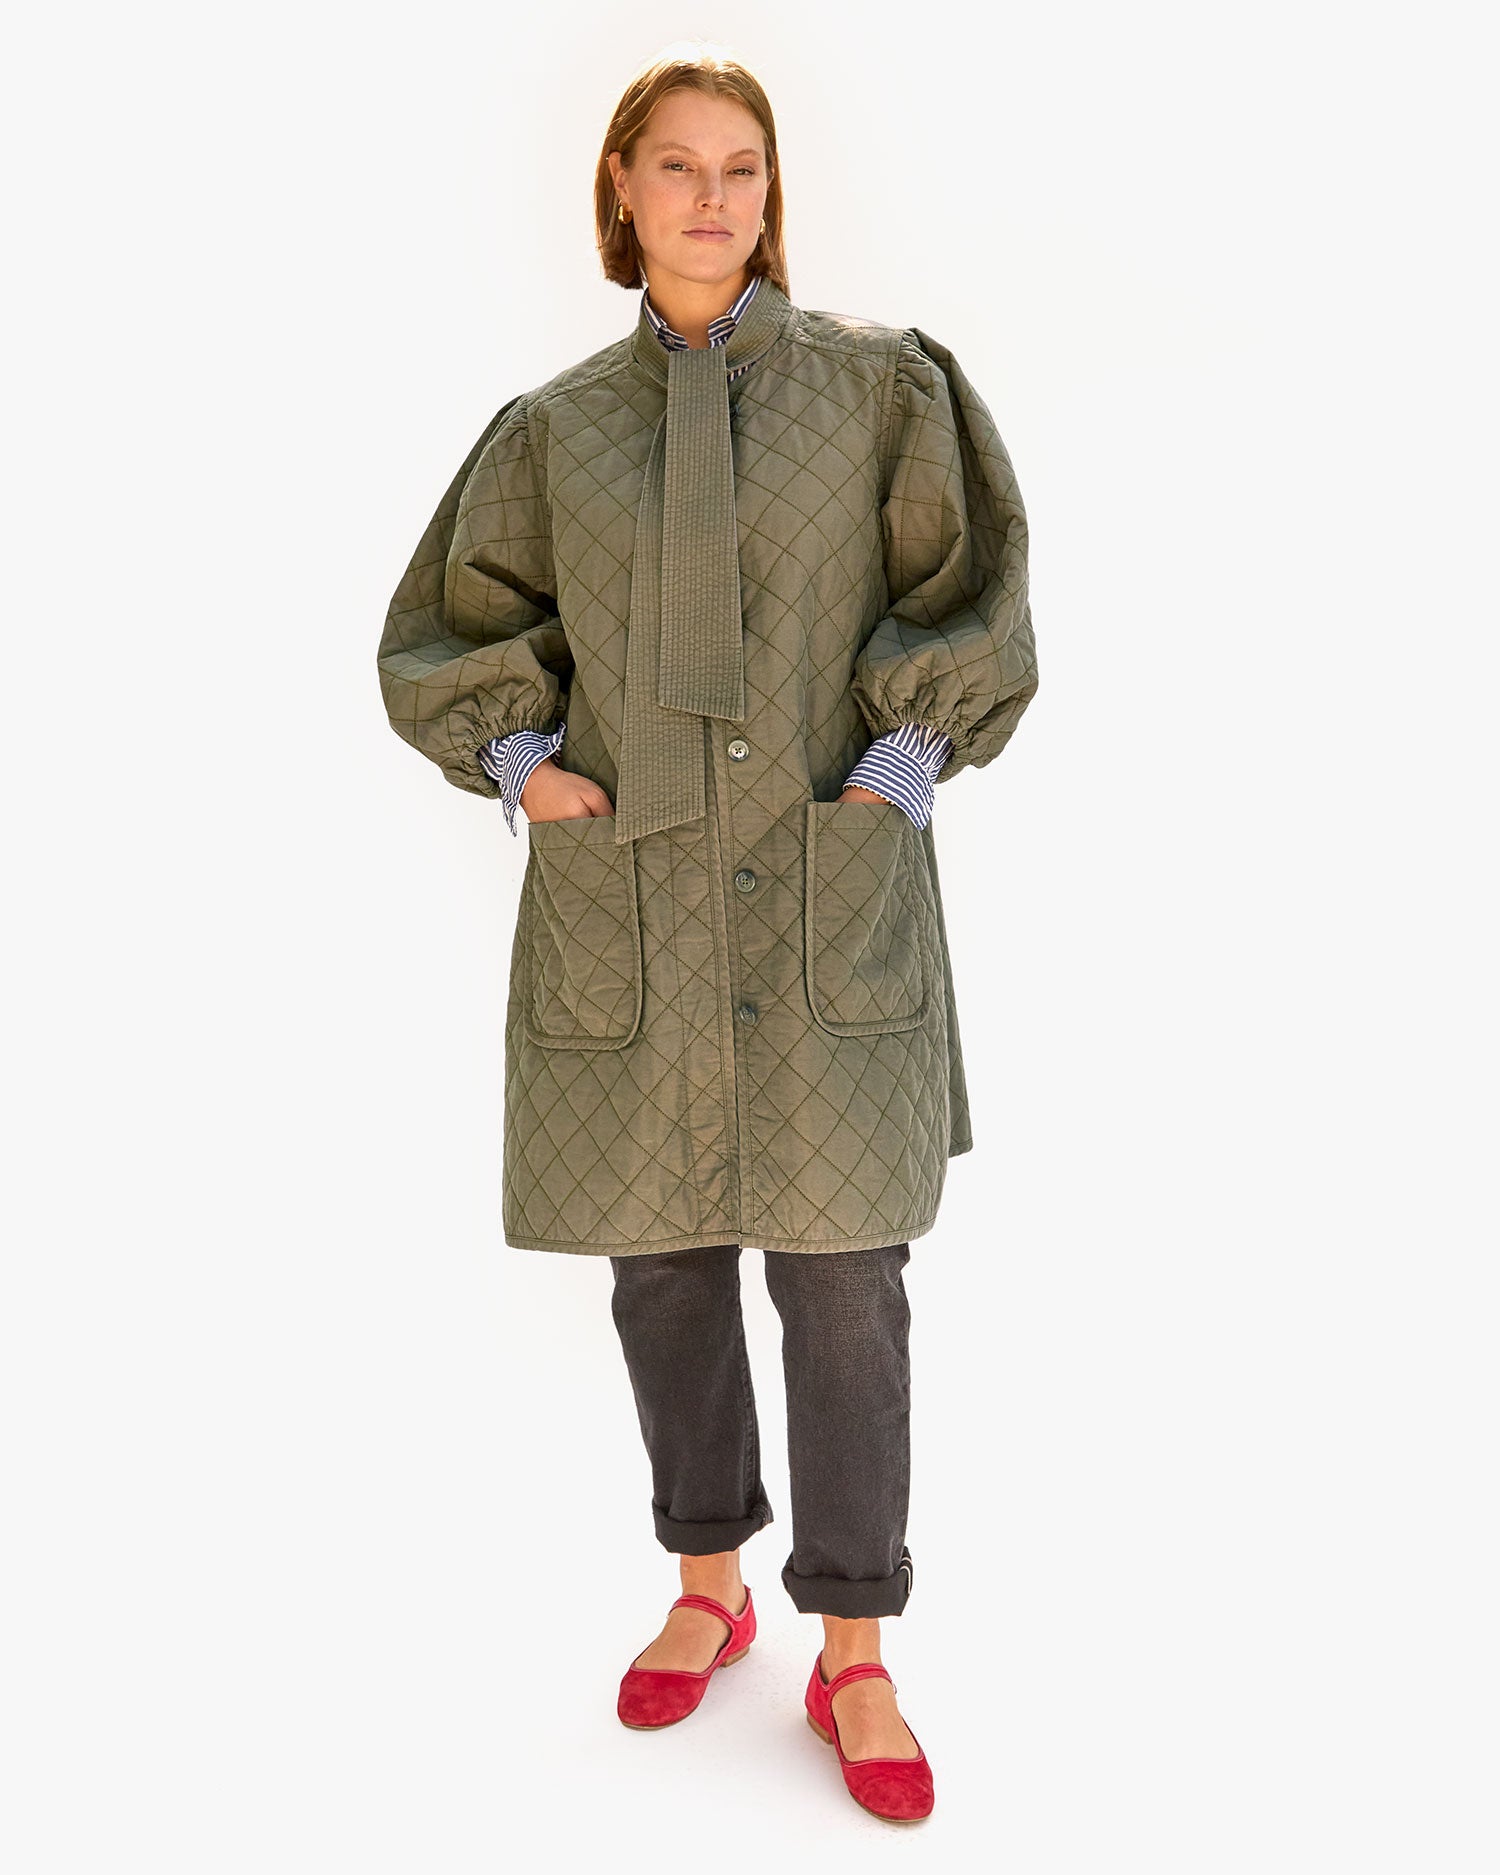 Sonnie wearing the Olive Quilted Clemence Car Coat and tucking her hands in the pockets. 